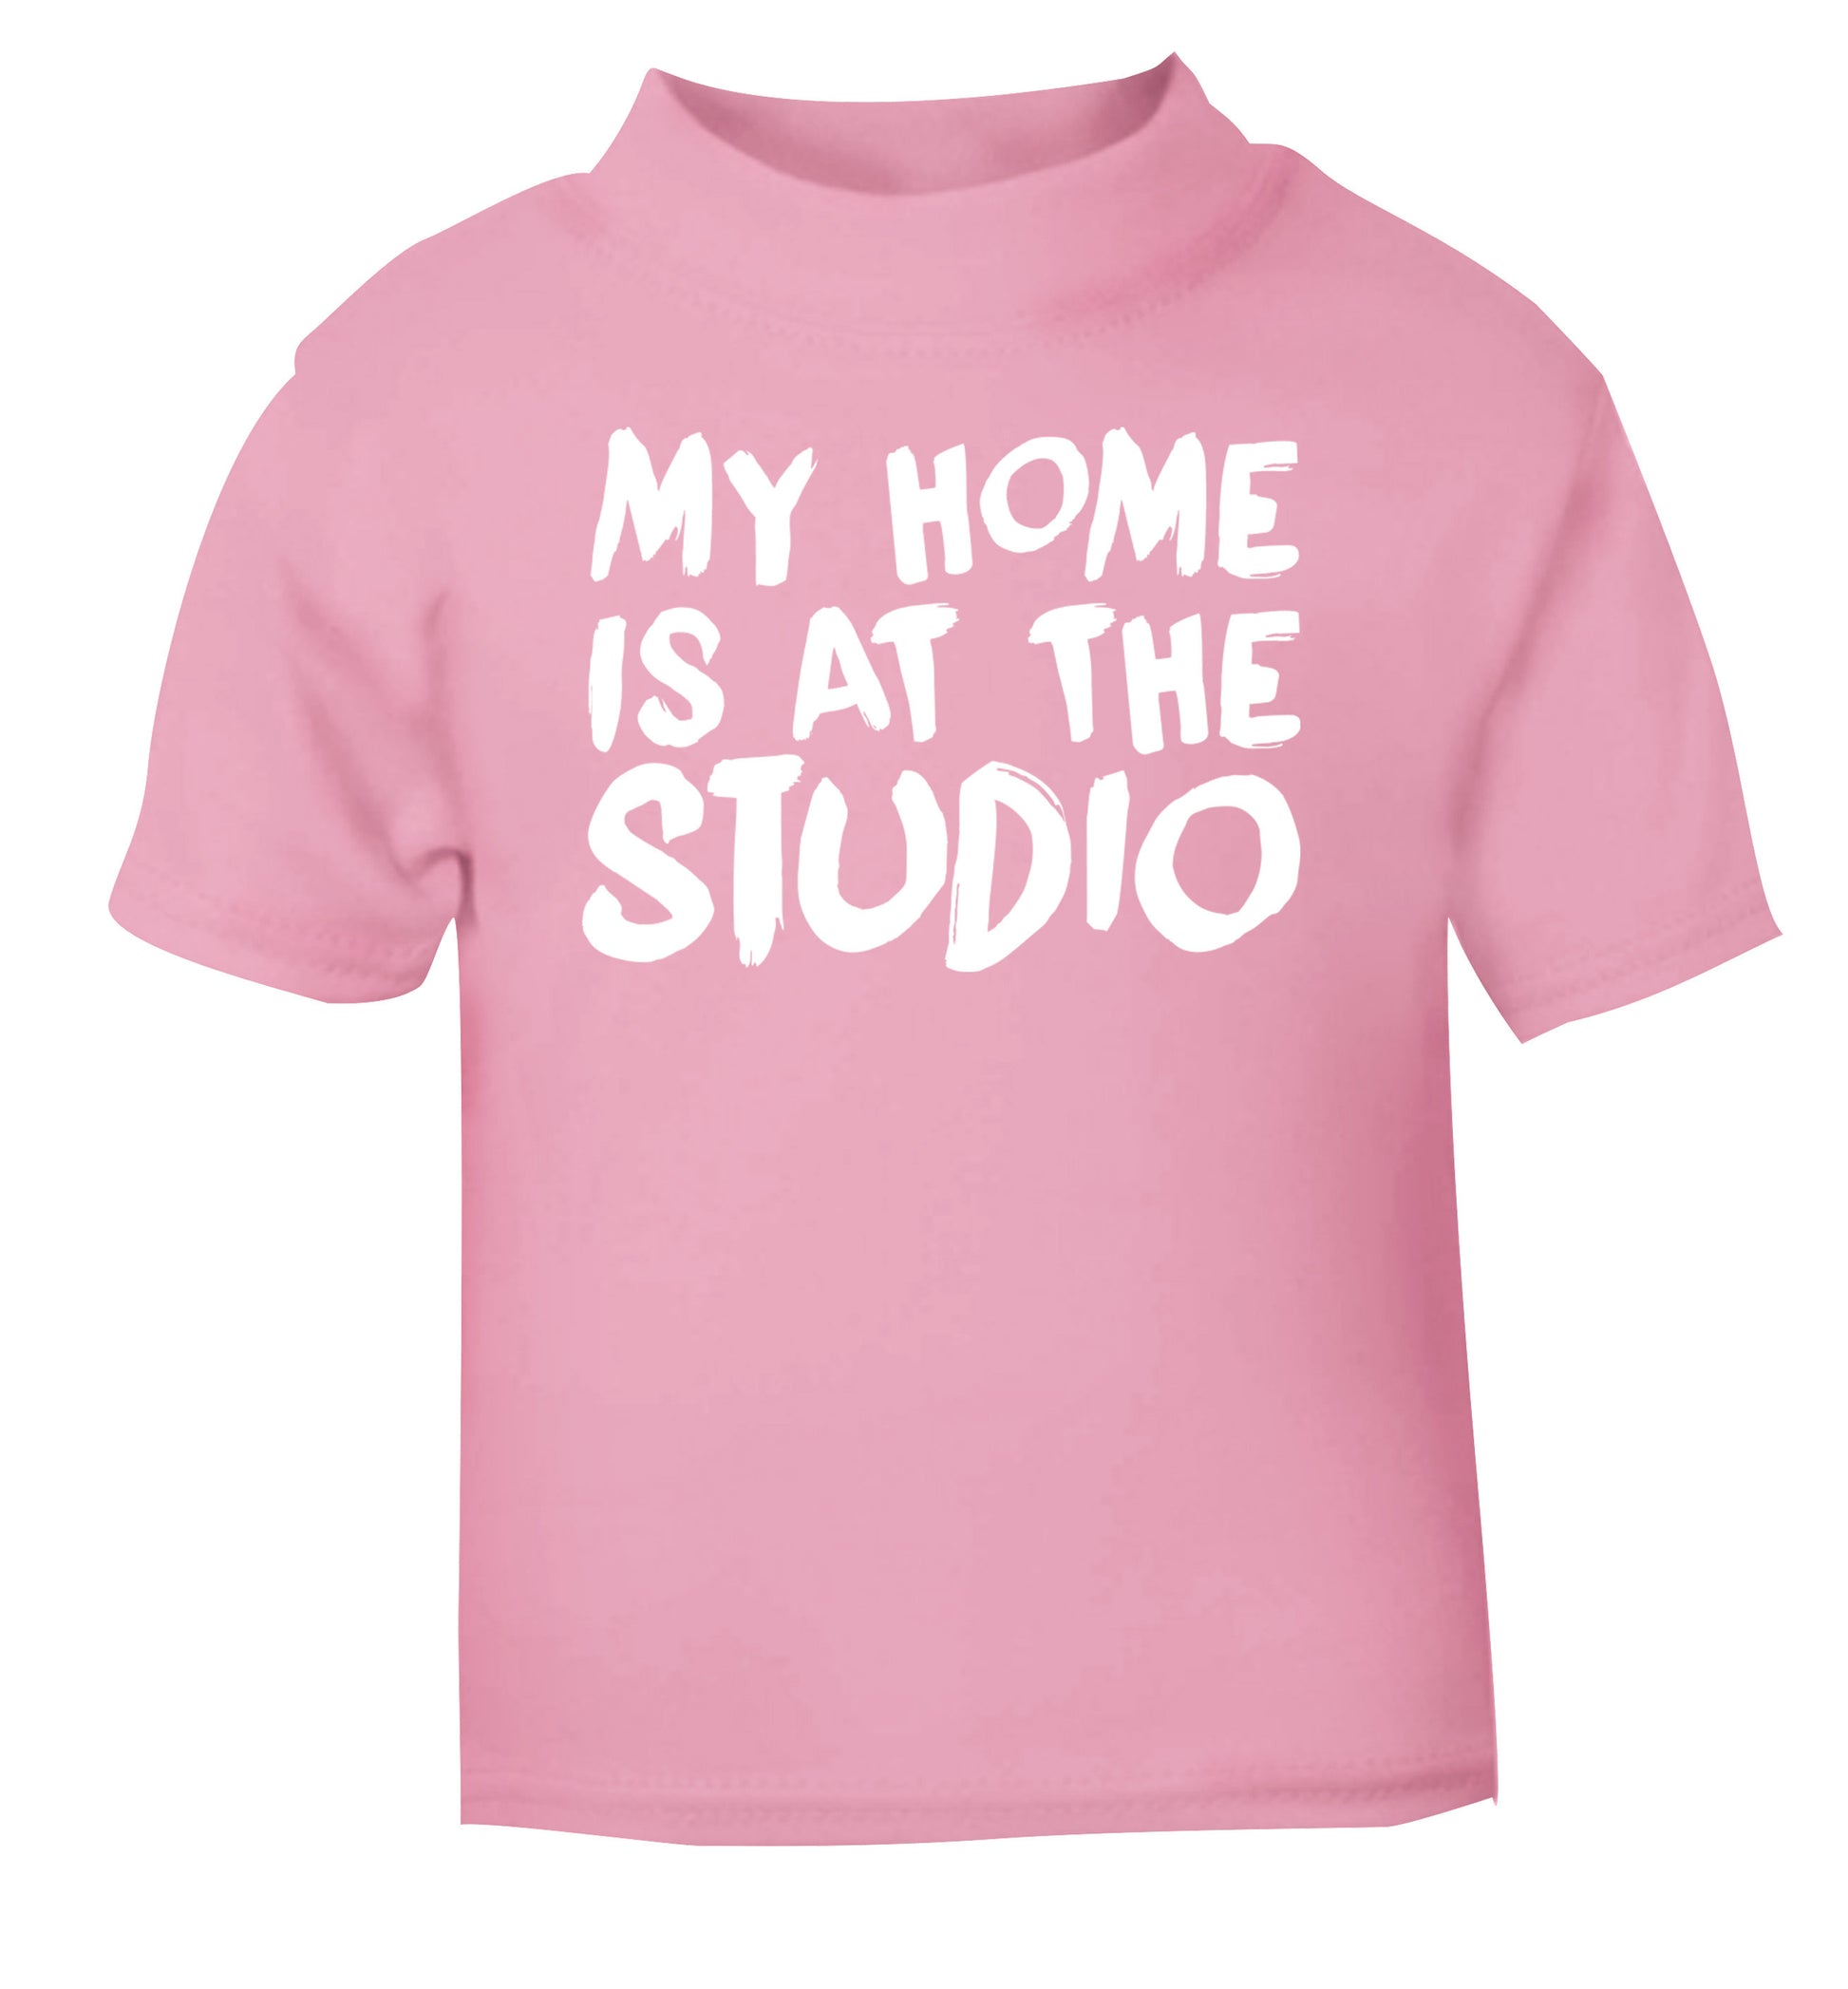 My home is at the studio light pink Baby Toddler Tshirt 2 Years